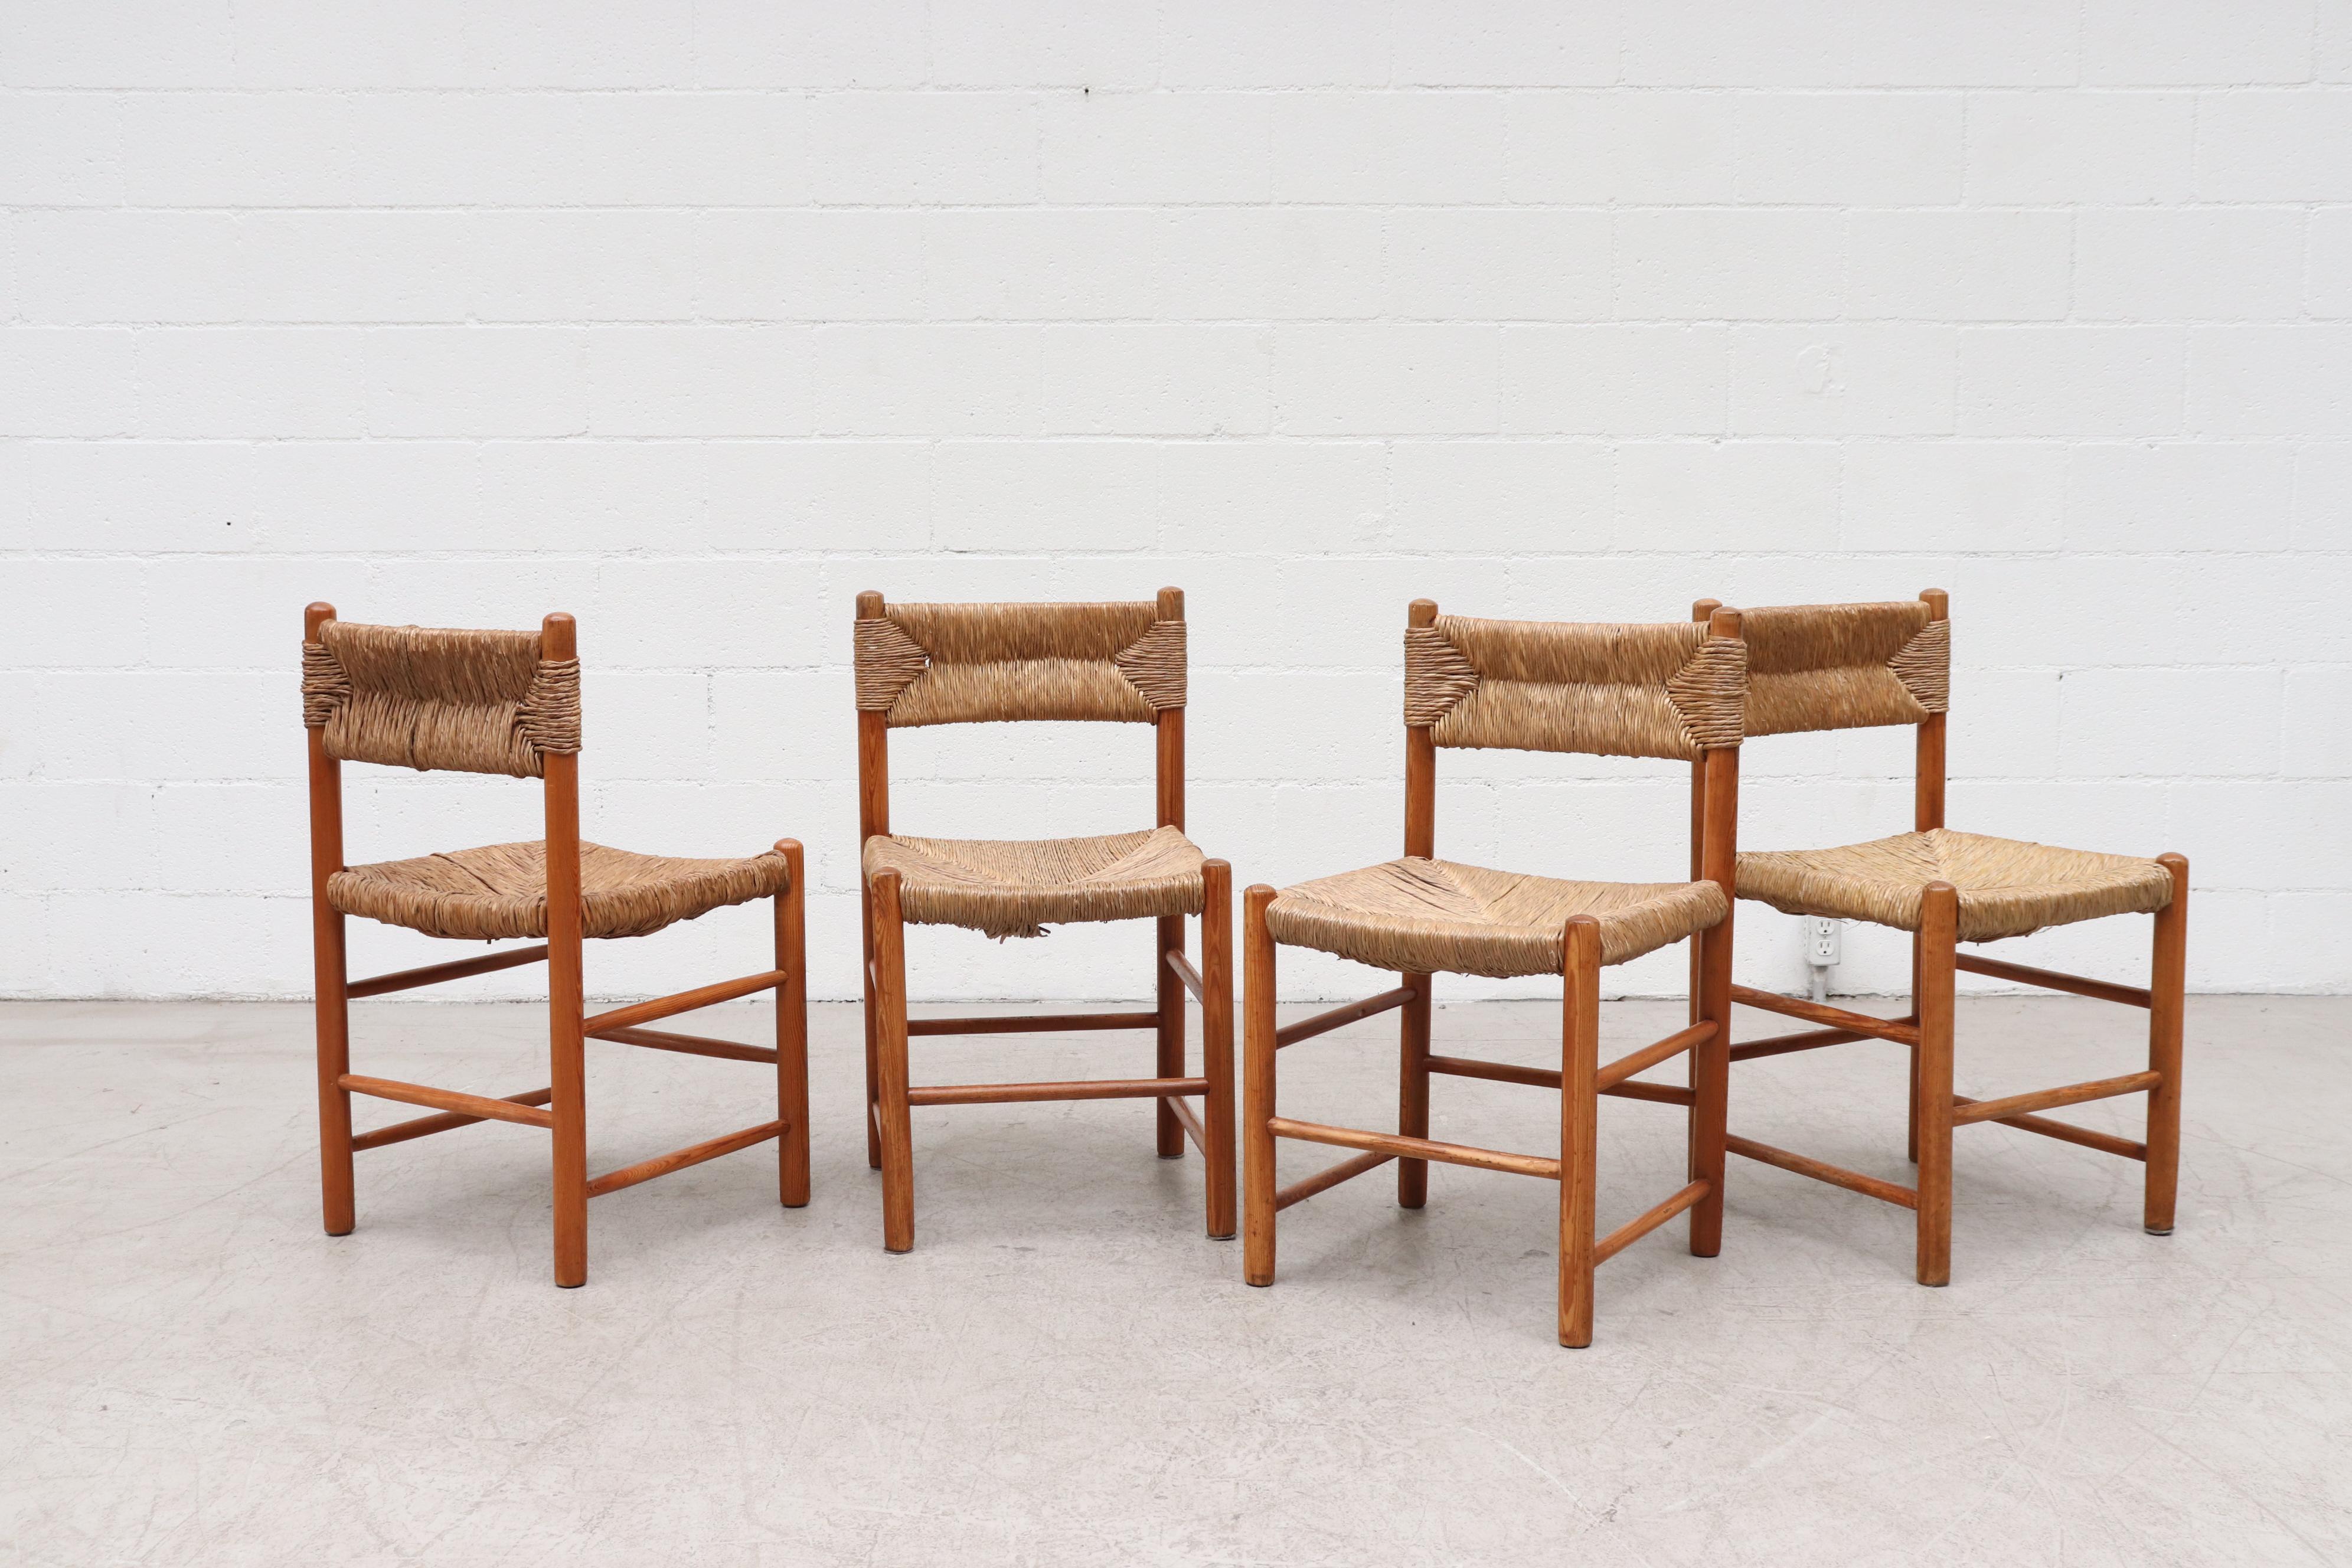 Set of 4 Charlotte Perriand Style Pine and Rush Dining Chairs. Lightly Refinished Pine Frames with Original Woven Rush Seat and Back Rest. In Very Original Condition with Visible Wear, Visible Breakage of Rush and Patina to Wood. Two Sets Available,